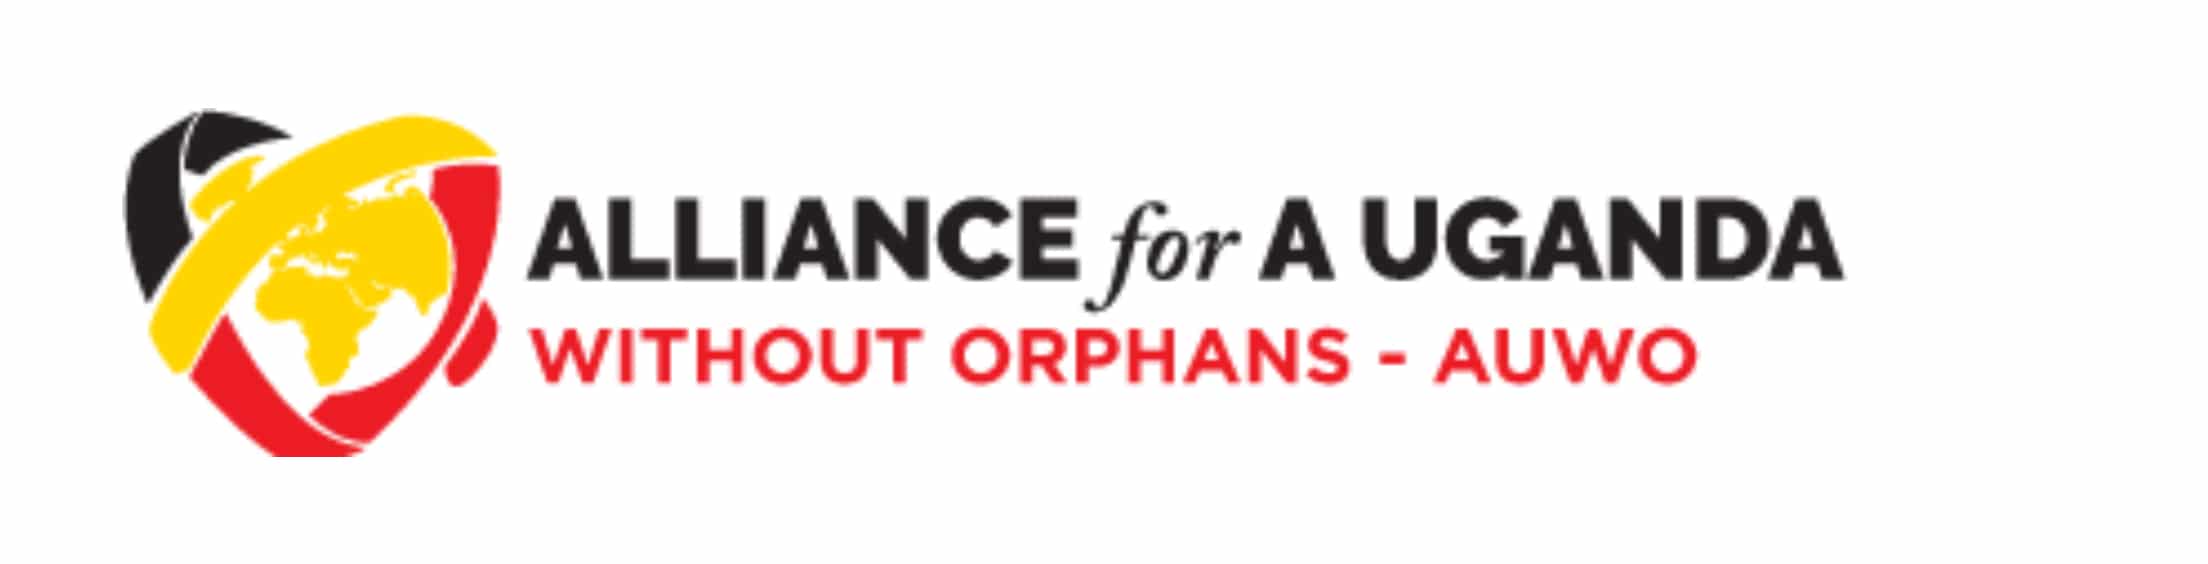 Alliance for a Uganda Without Orphans